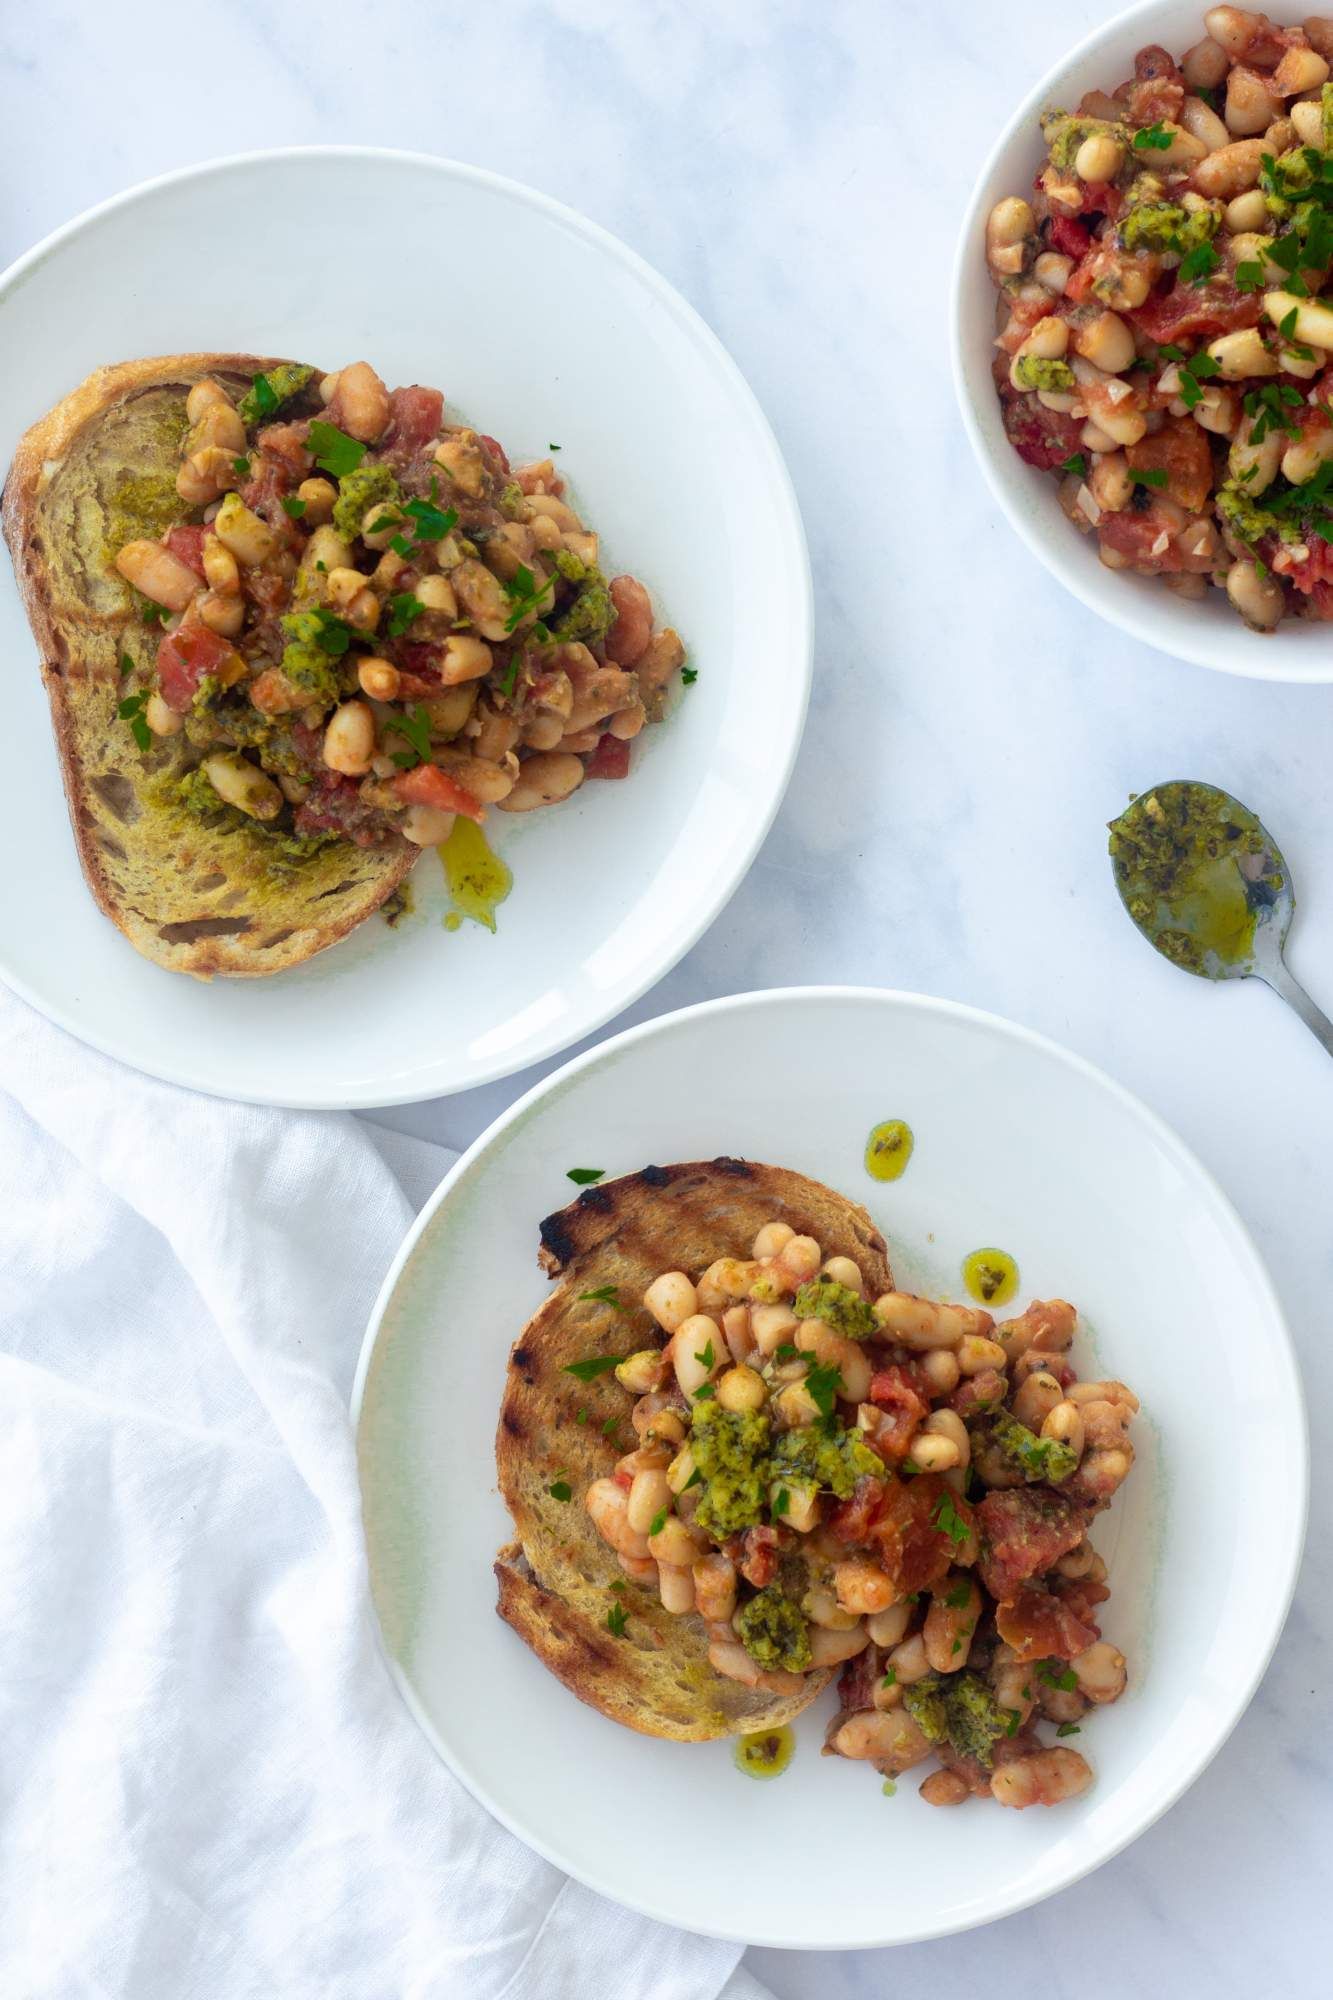 White beans stewed with tomatoes, garlic, and spices and then topped with pesto on two slices of toasted bread.